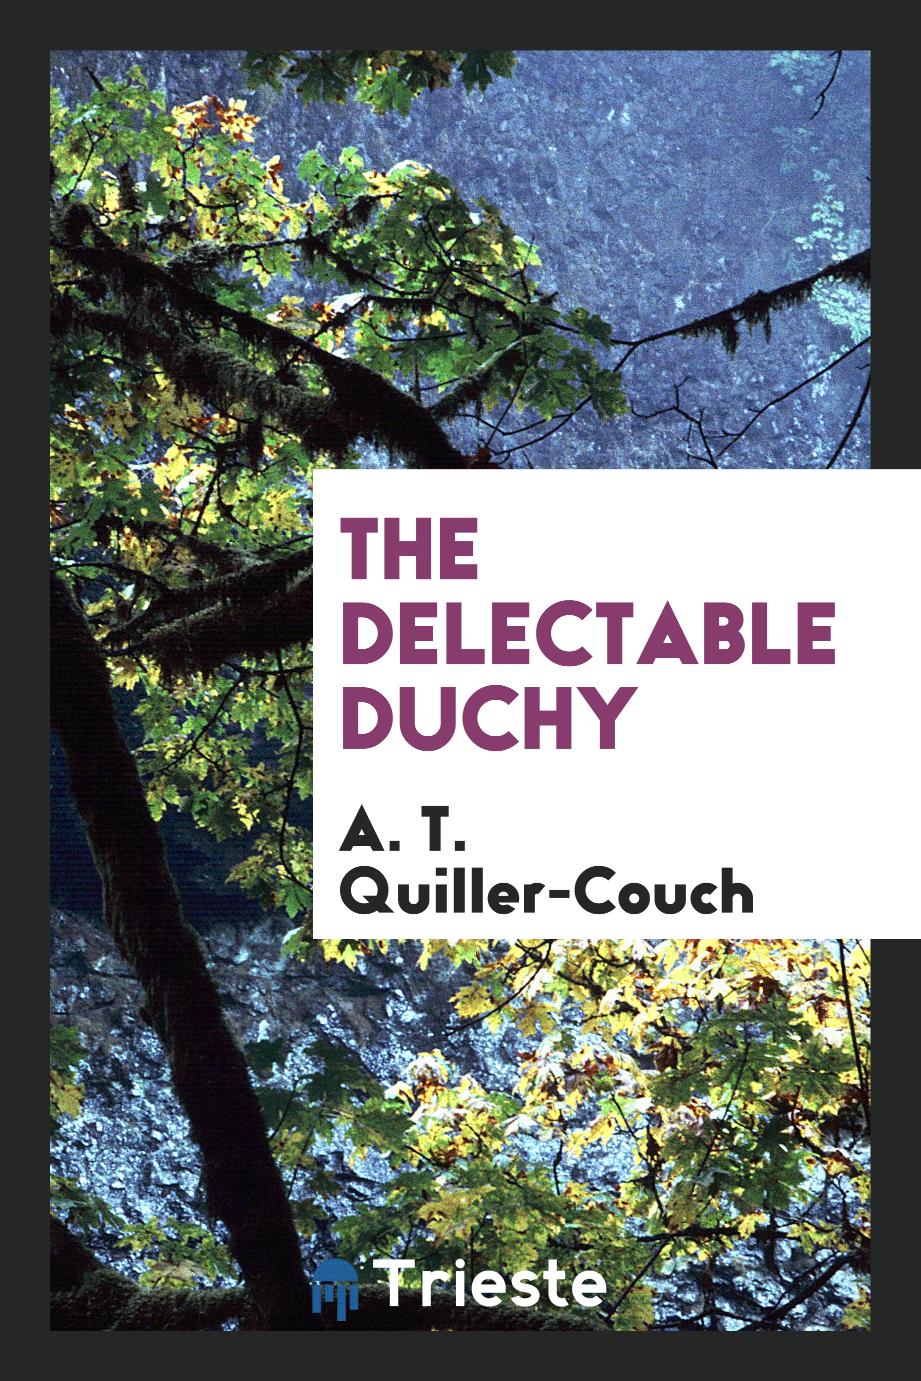 The delectable duchy